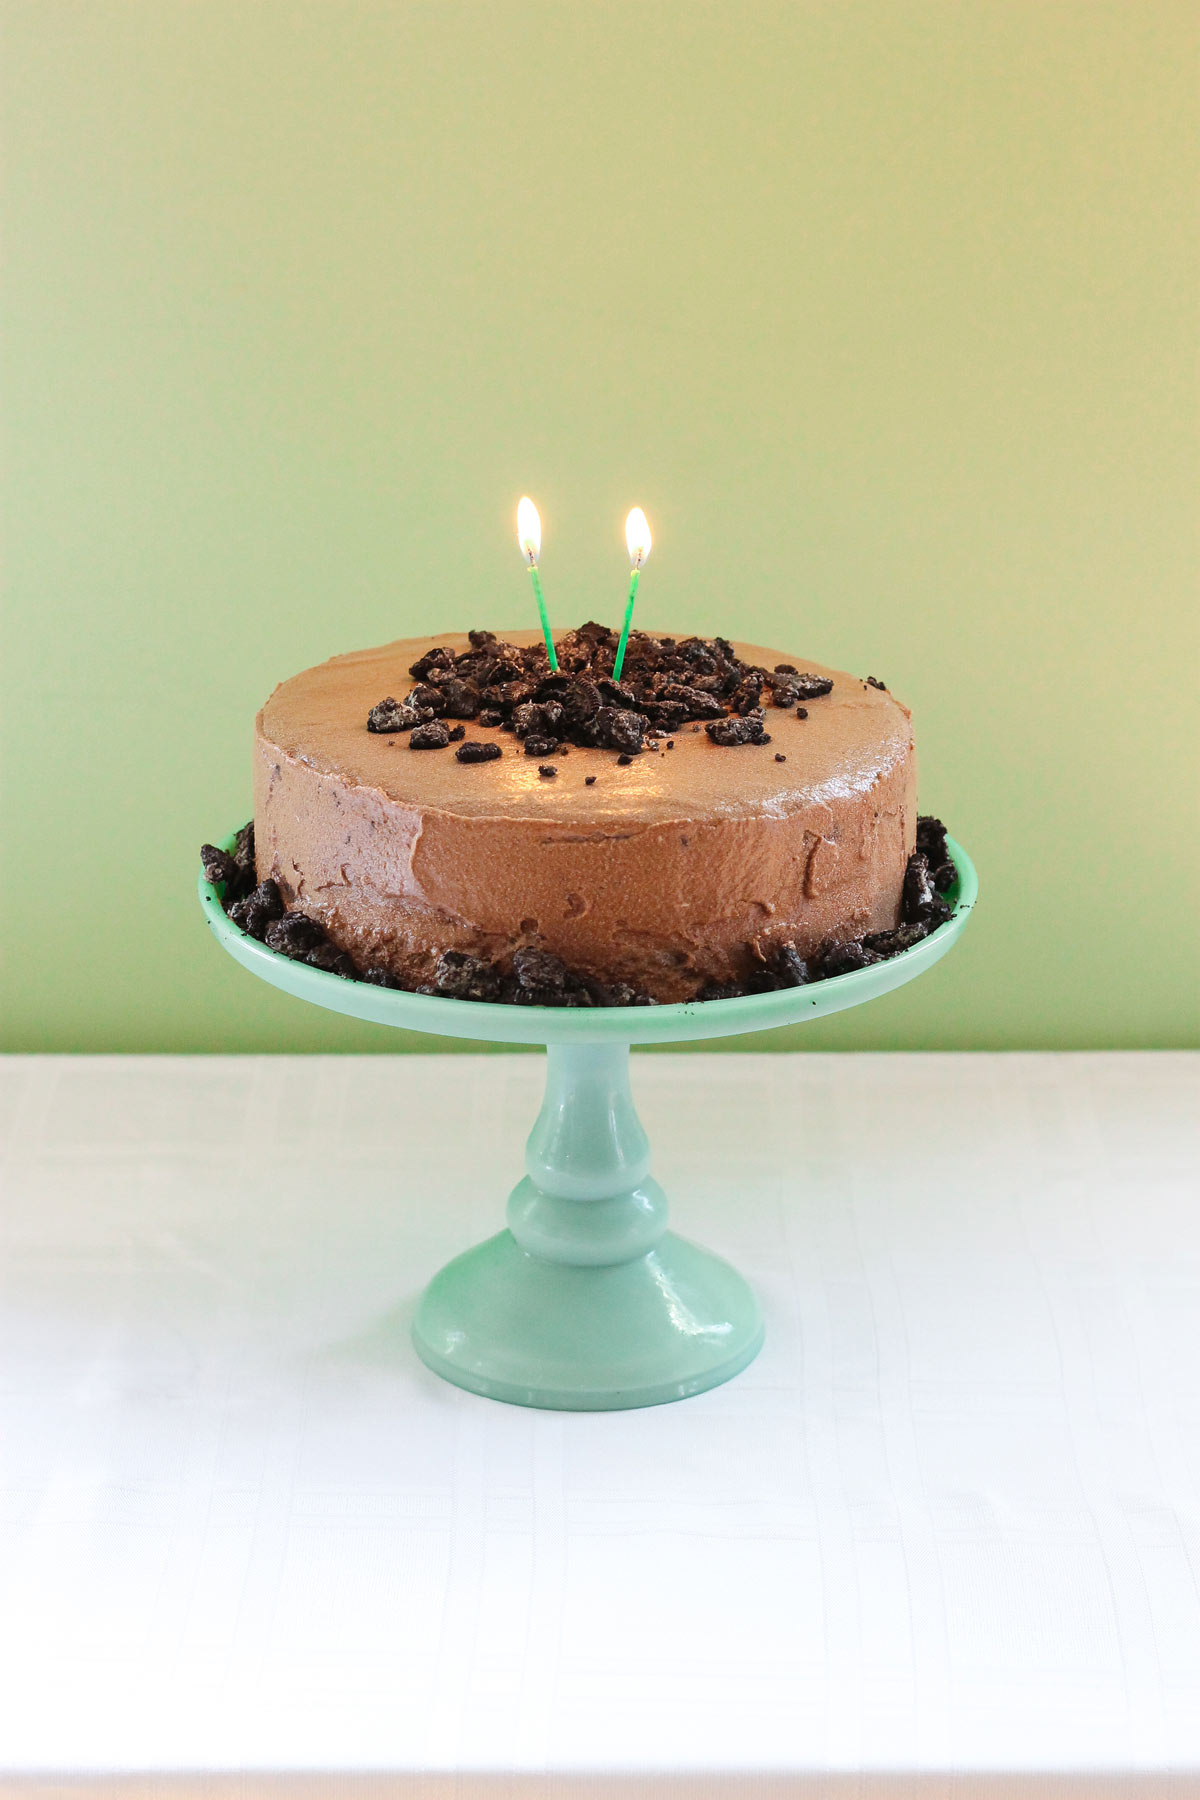 Mocha cake with mocha frosting with candles on a green cake platter